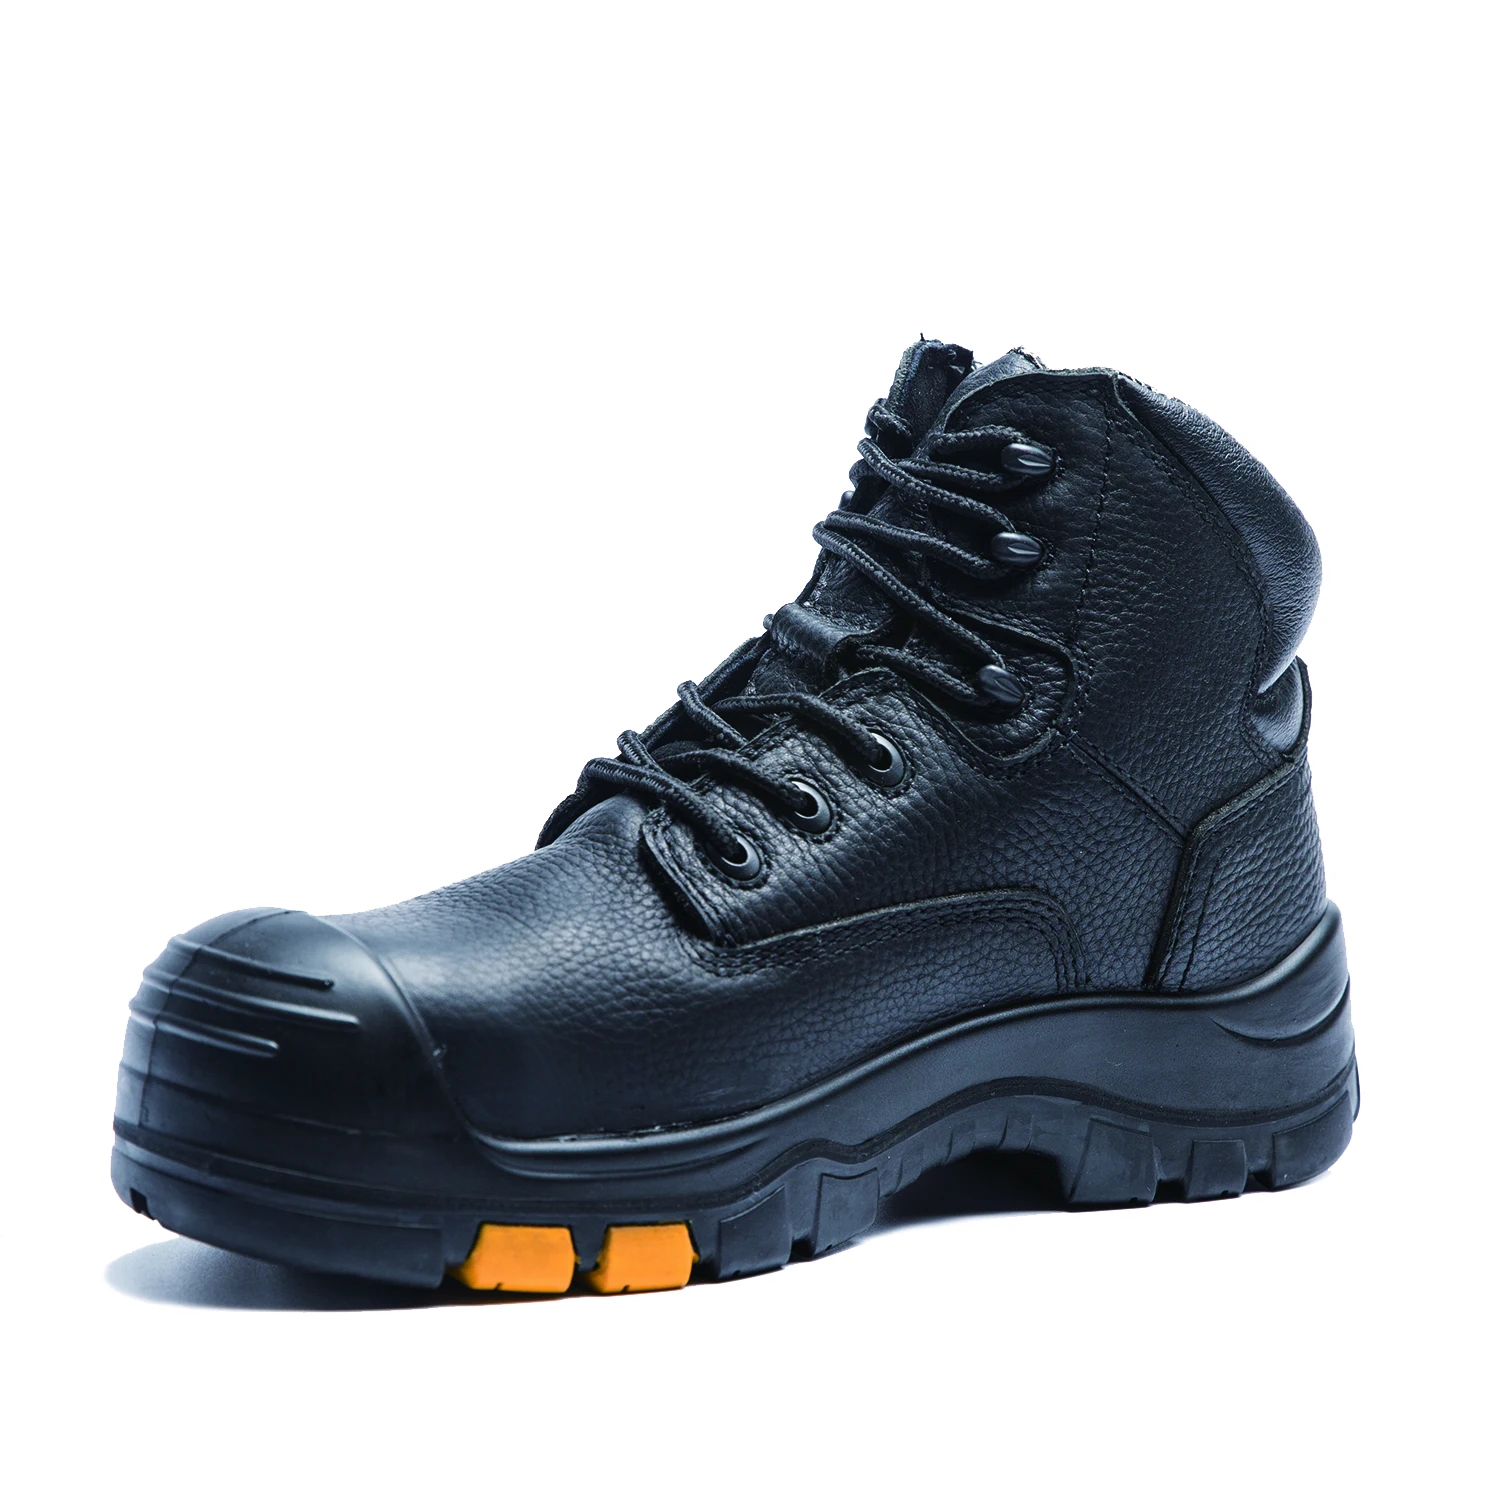 wholesale work boots